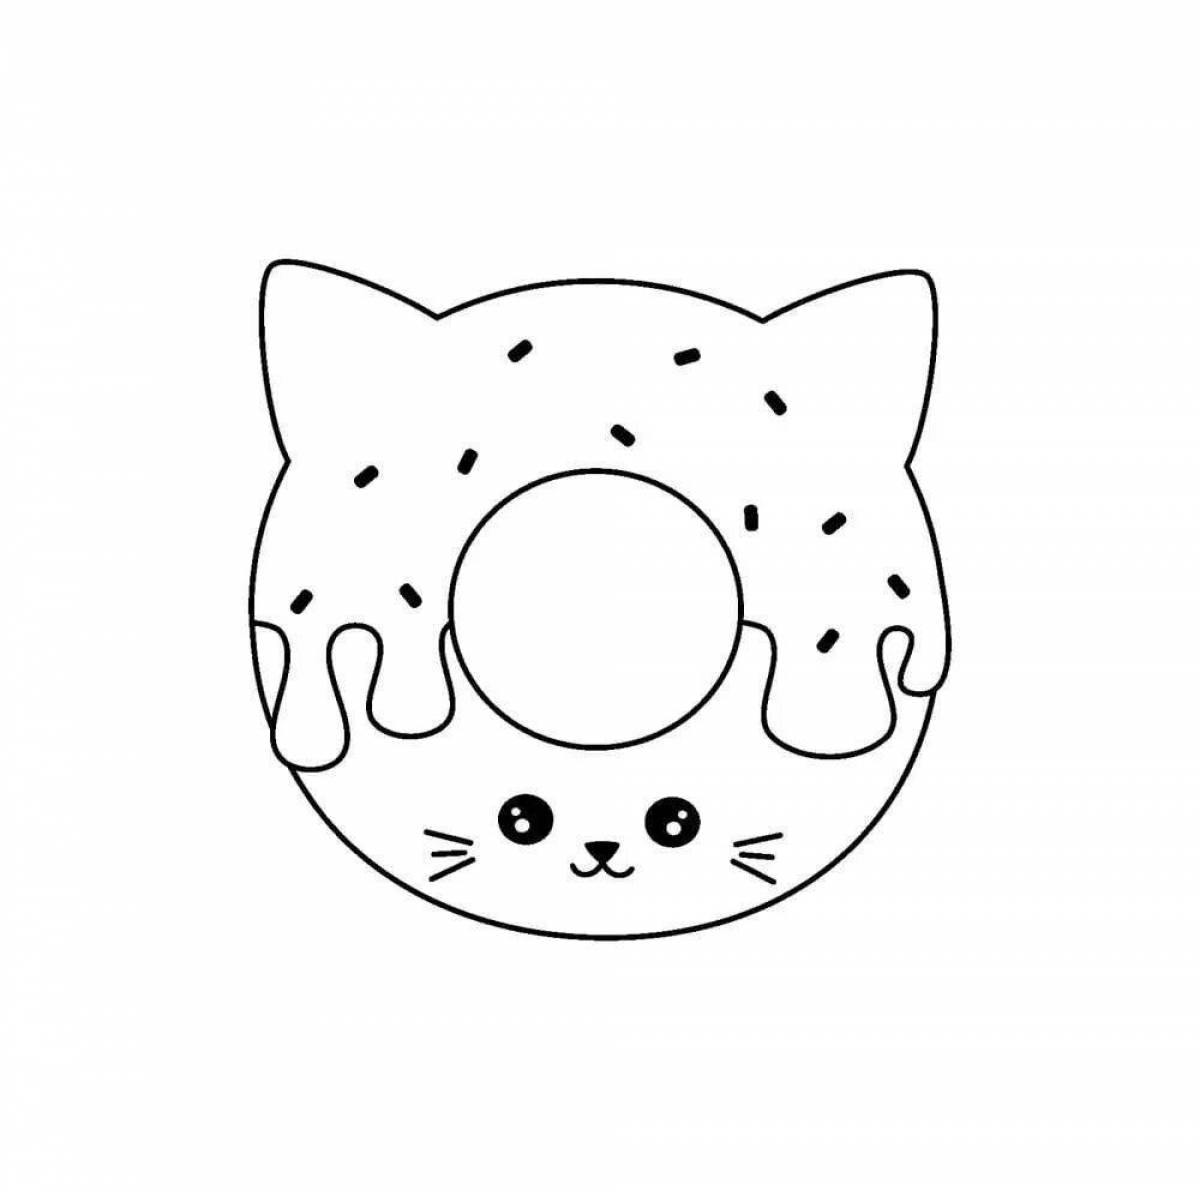 Coloring book bright donut cat